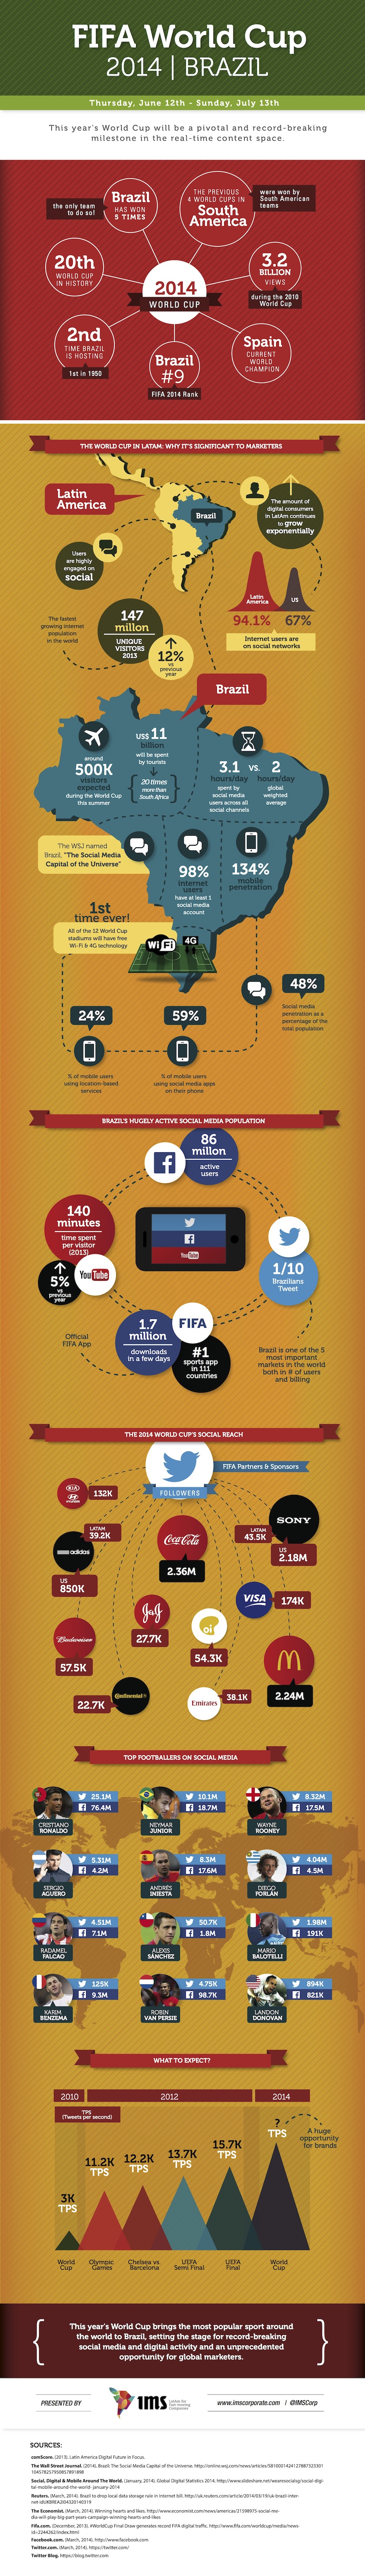 Are you ready for the globe’s first social media World Cup? - Alvinology